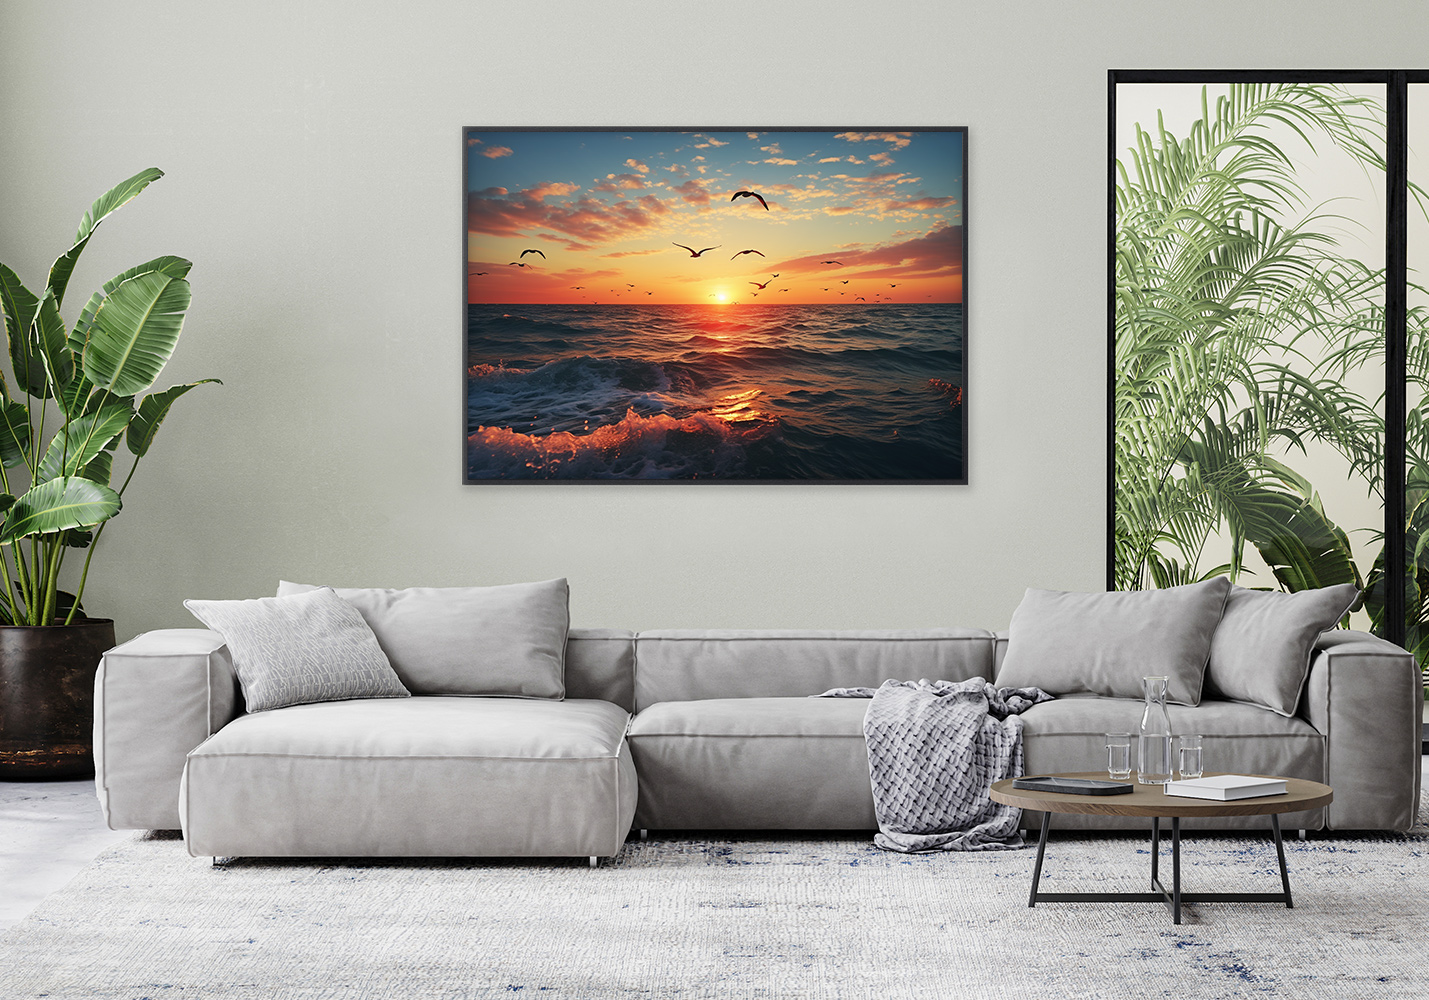 Ocean with birds at sunset